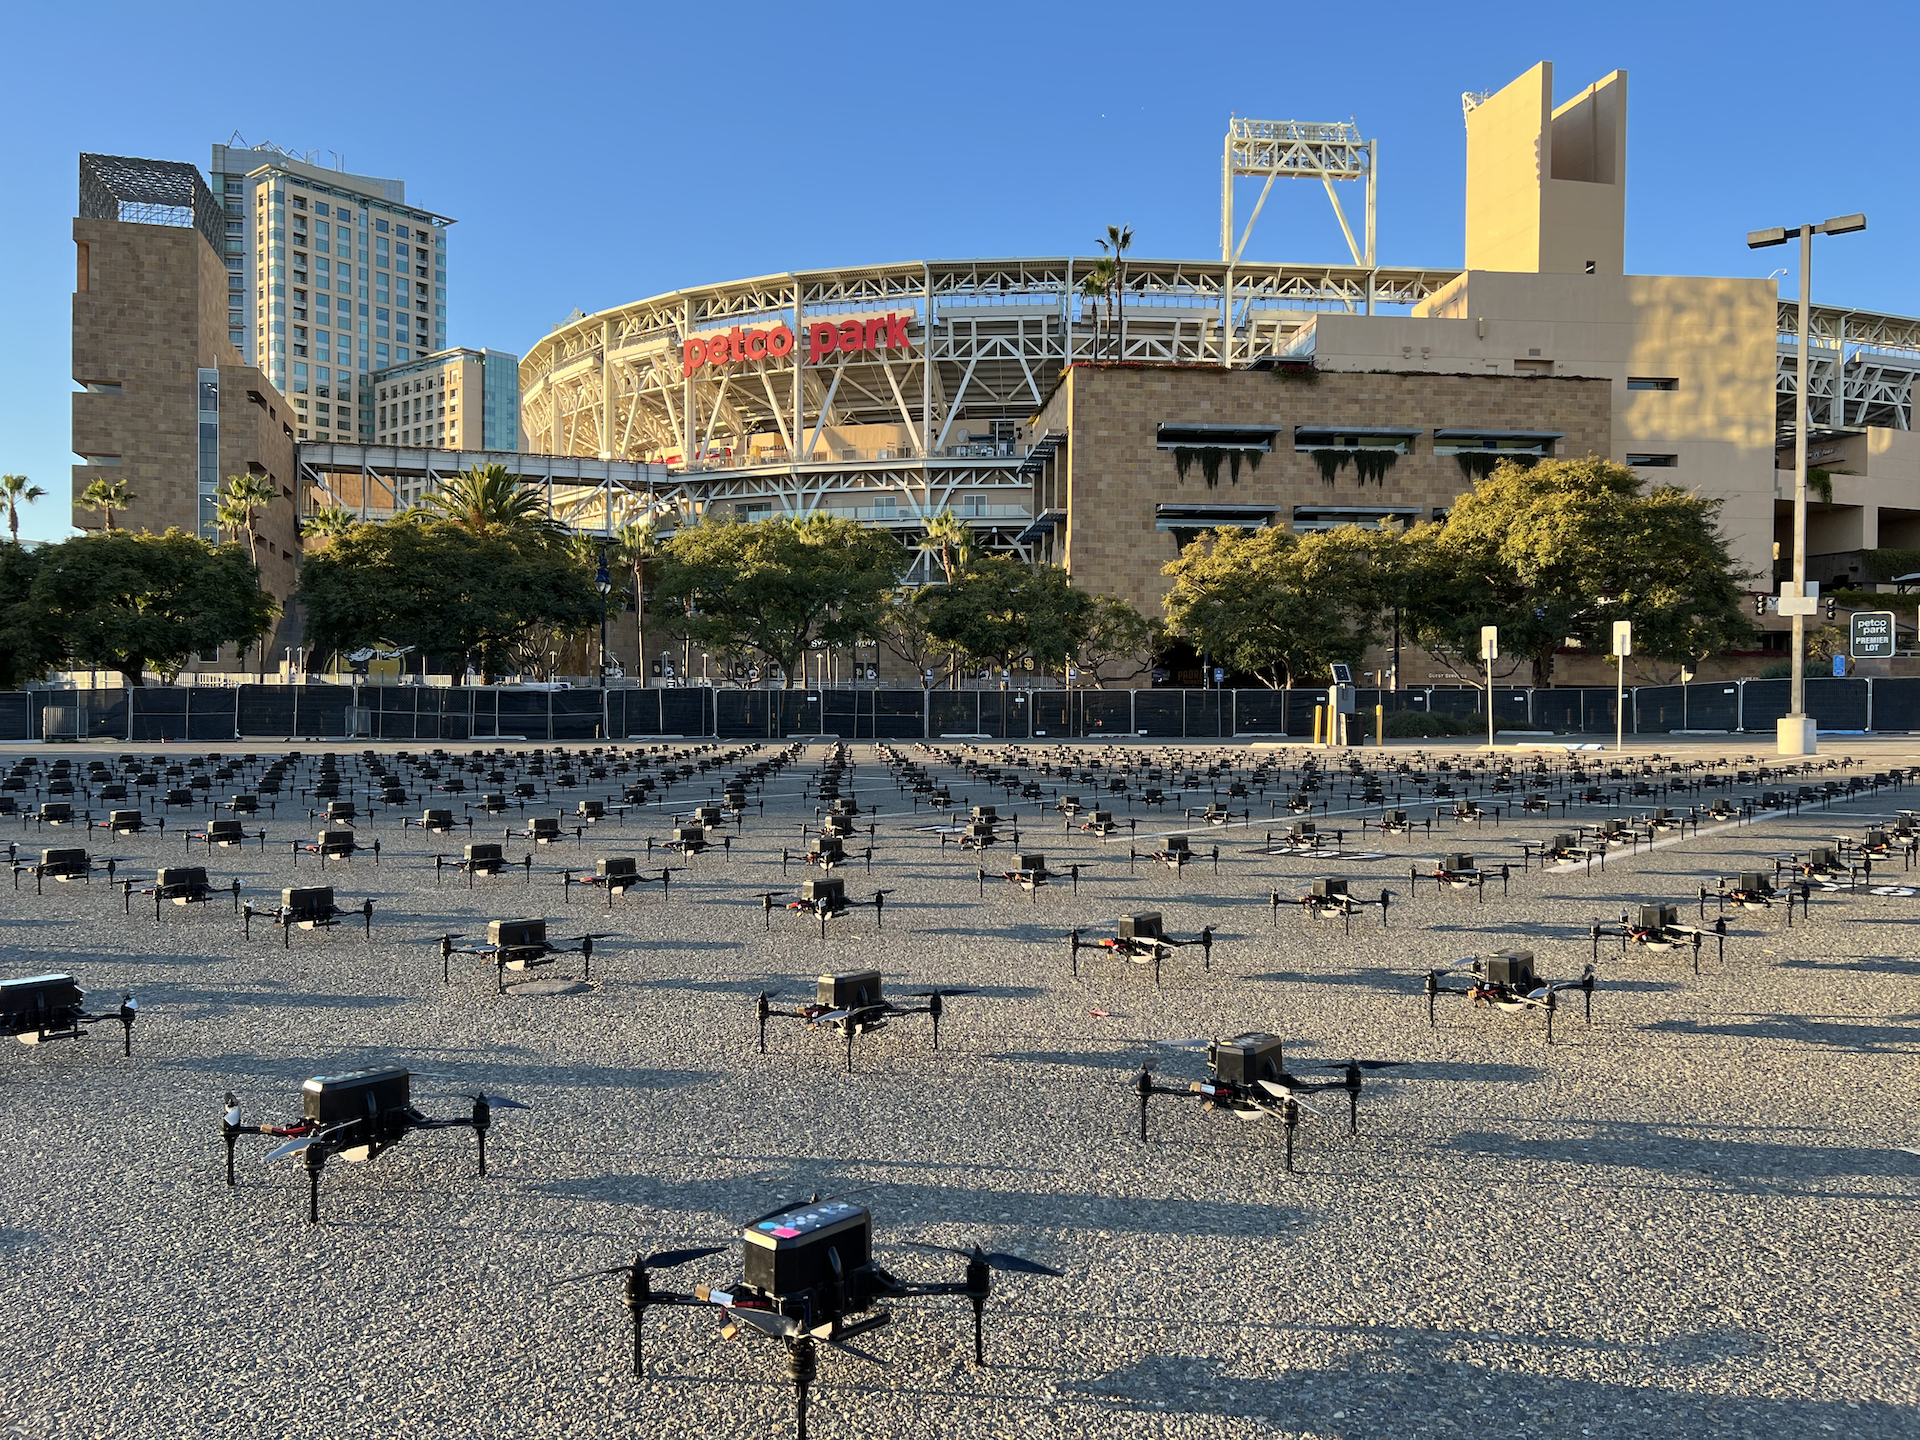 Verge Aero team setting up a drone show in a parking lot in San Diego, CA